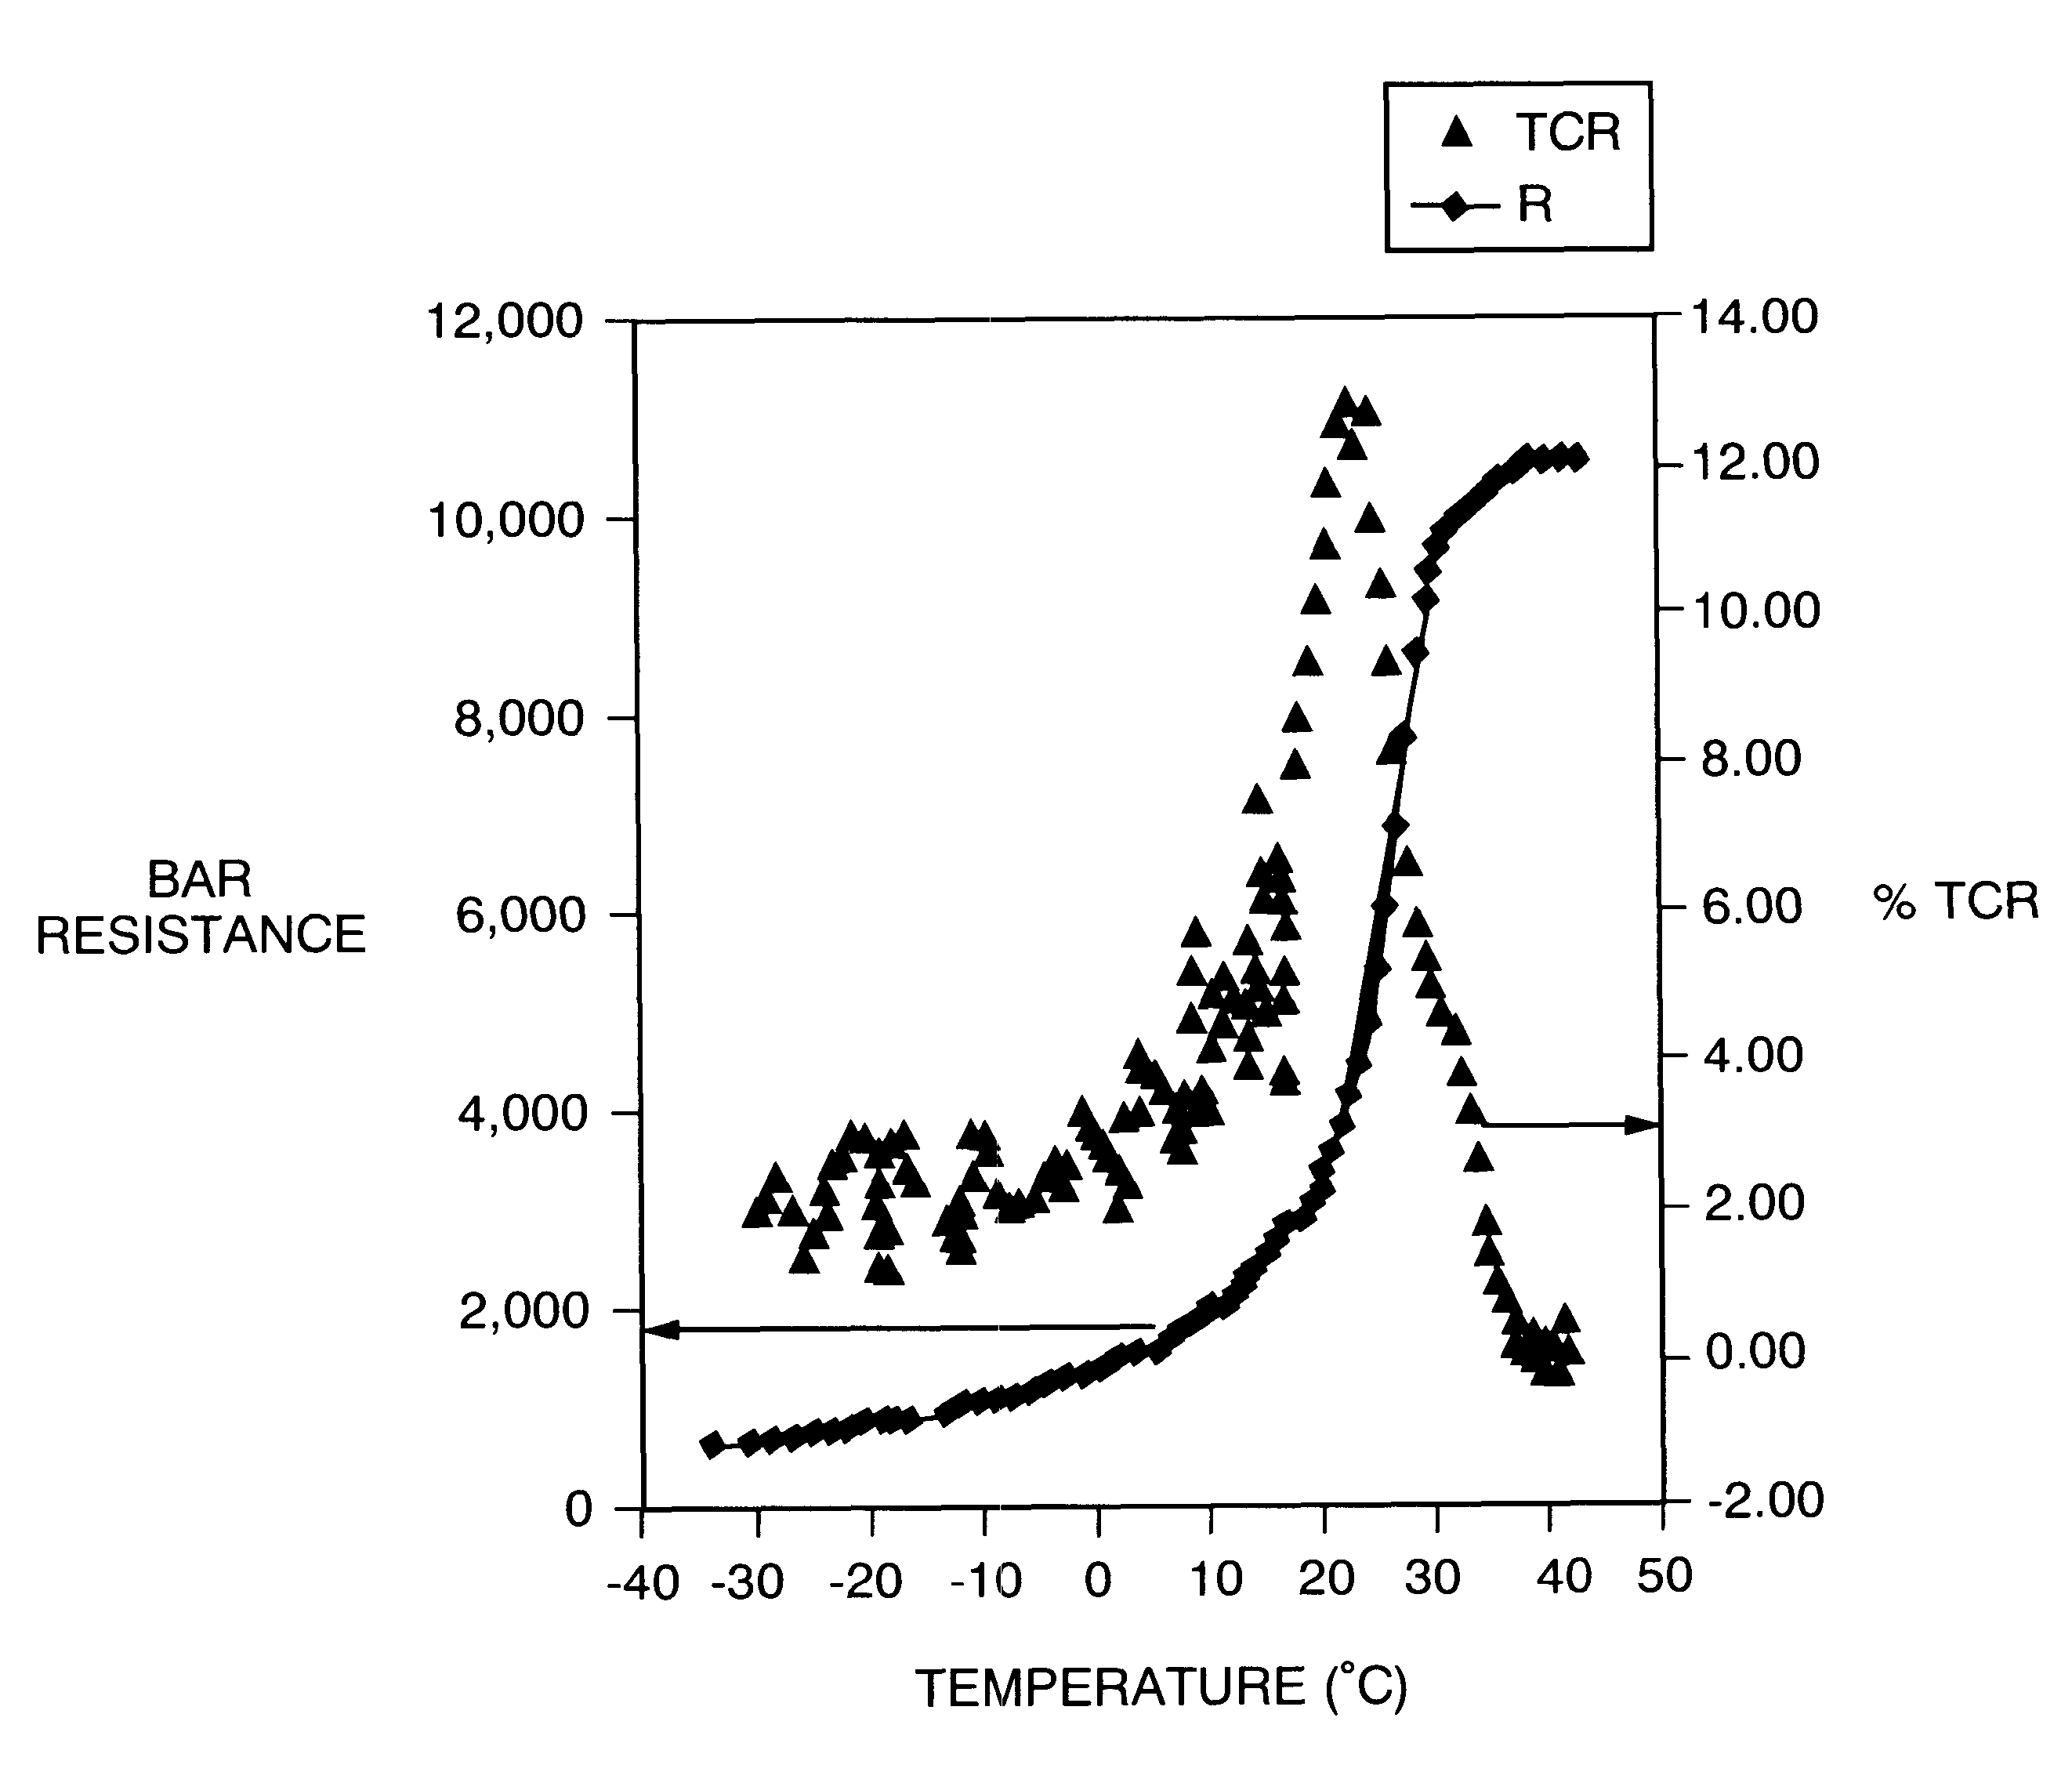 Large temperature coefficient of resistance material